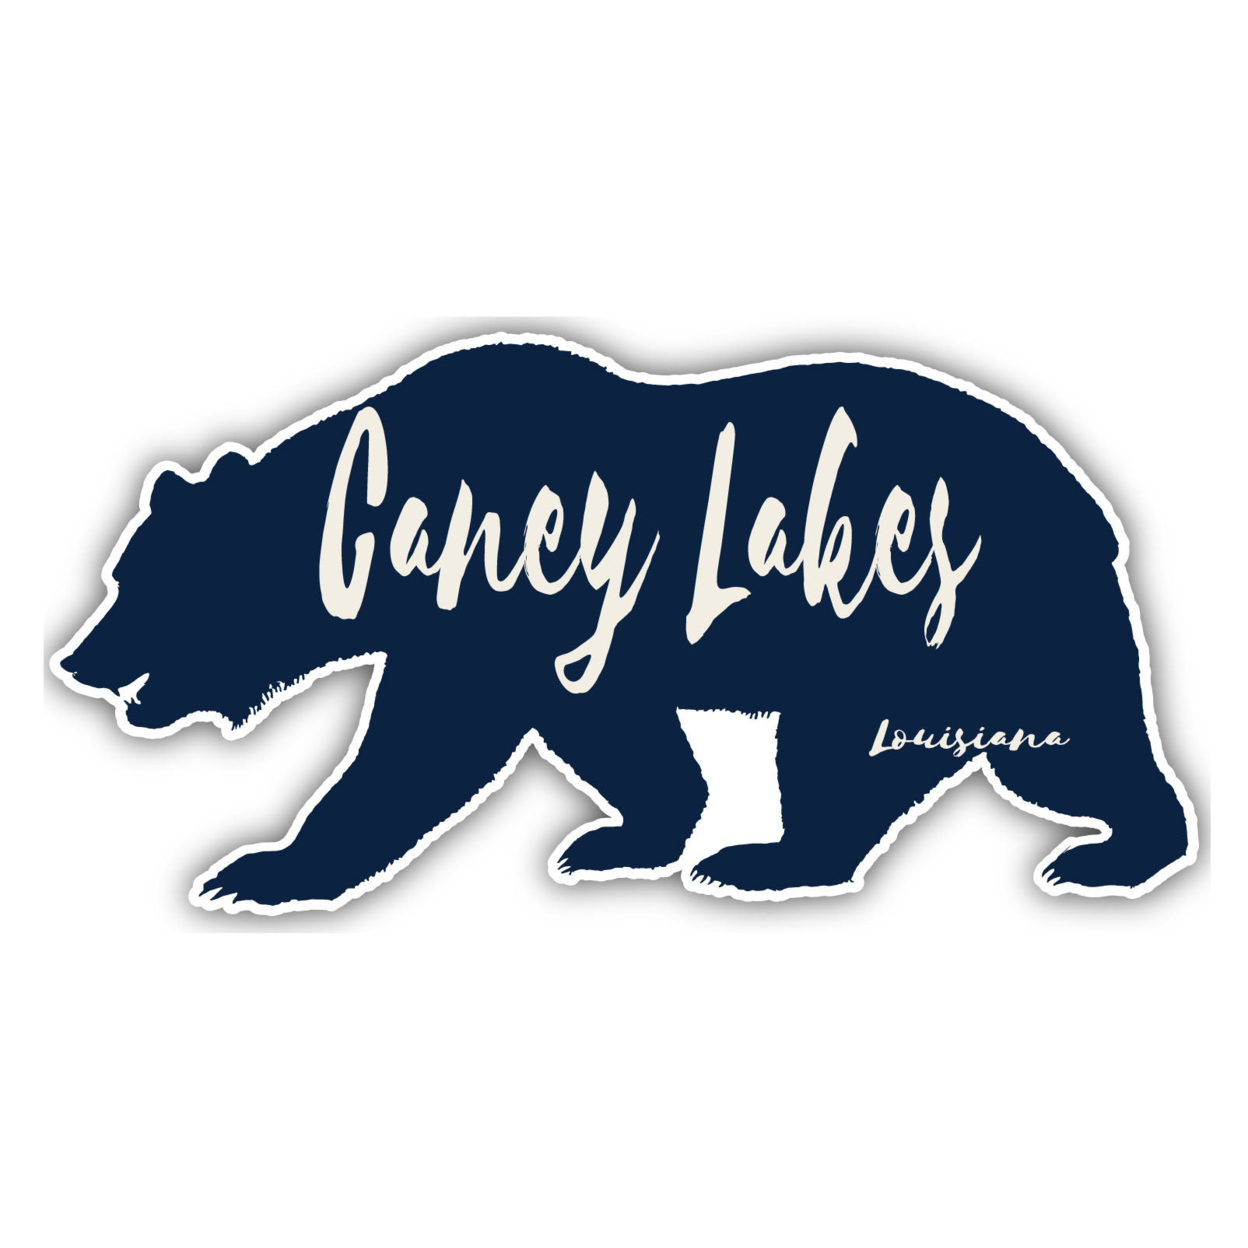 Caney Lakes Louisiana Souvenir Decorative Stickers (Choose Theme And Size) - 4-Pack, 10-Inch, Bear